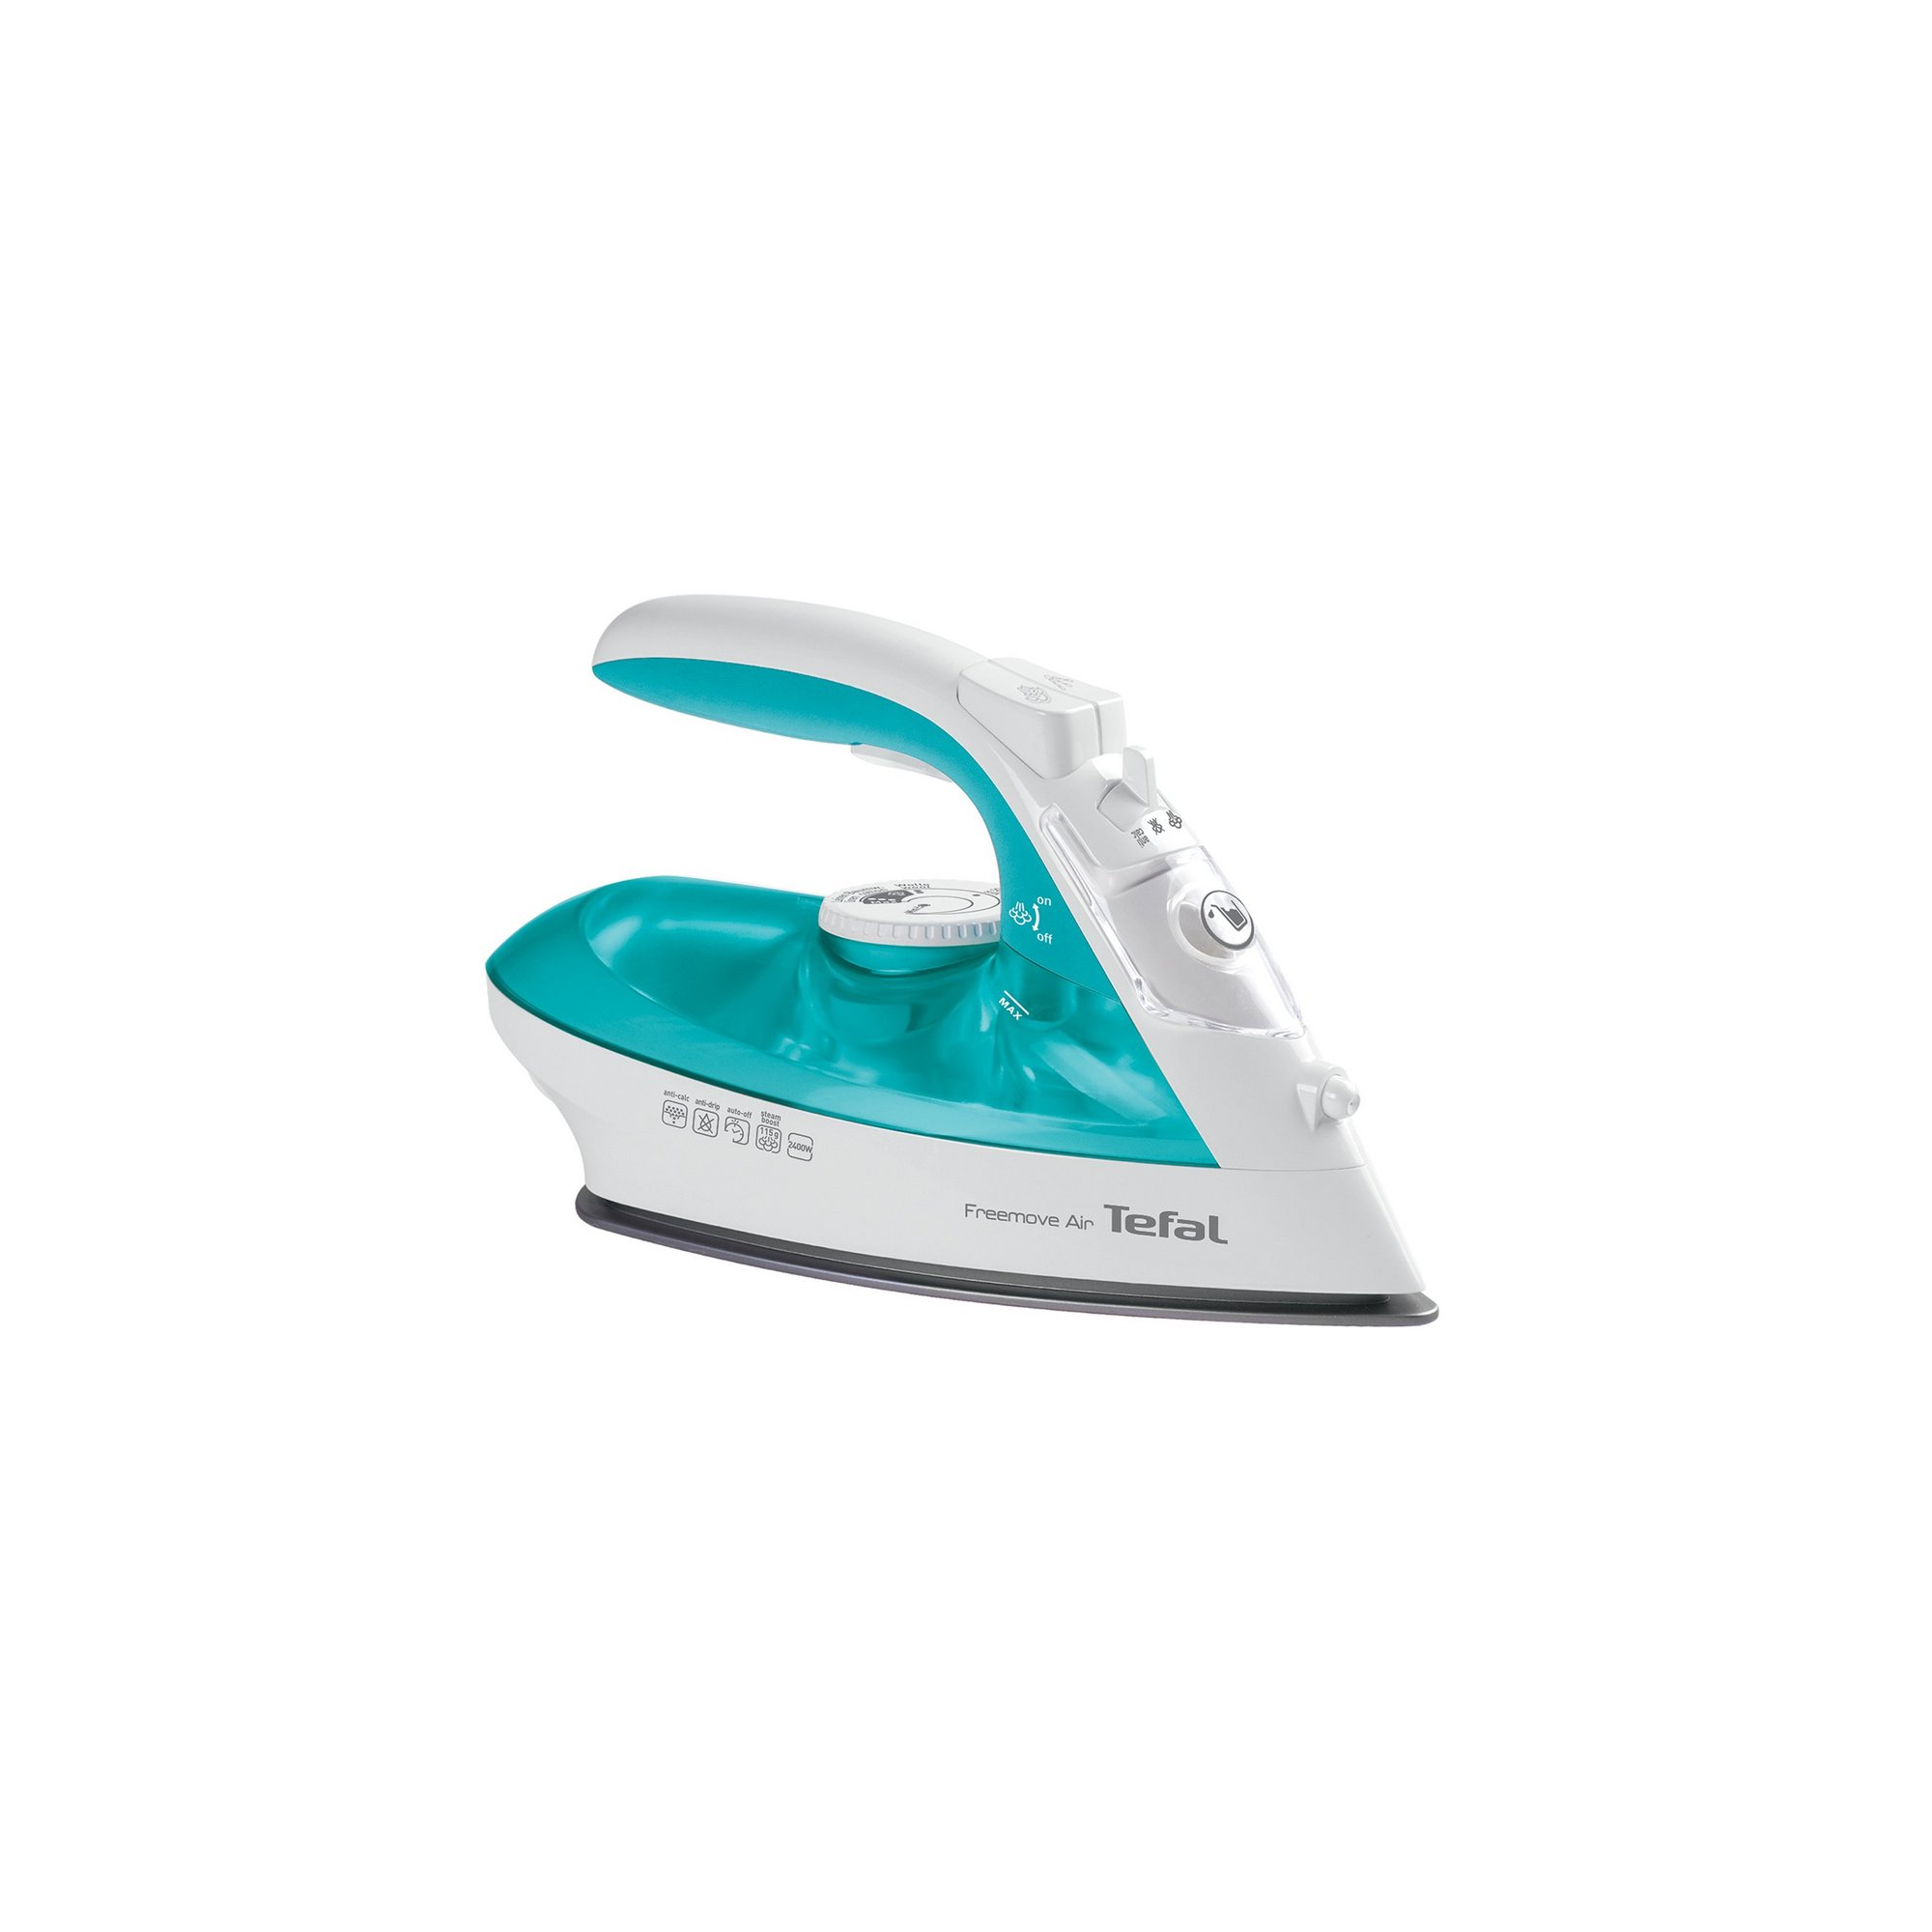 more about tefal freemove air 2400w cordless steam iron. tefal freemove air...